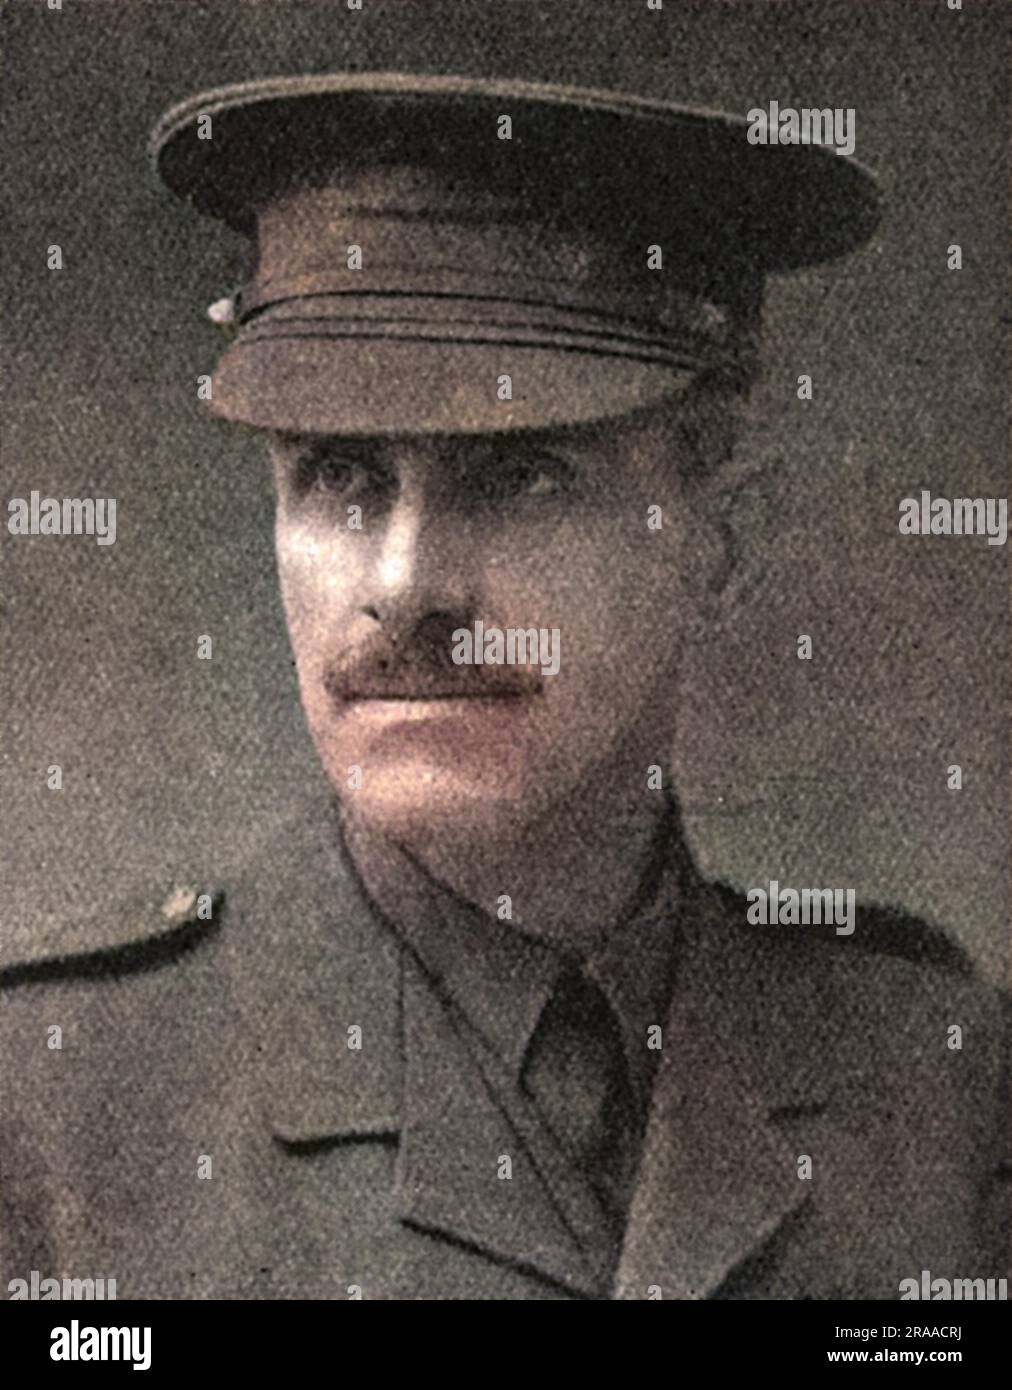 Lieut.-Colonel W. N. Campbell C.S.O. who was, before the war on the staff of The Tatler, but like all the other officers in the reserve, rejoined and was posted to Mesopotamia where he did duty as a A.A.G.  He was twice mentioned in despatches and awarded the D.S.O.     Date: 1917 Stock Photo